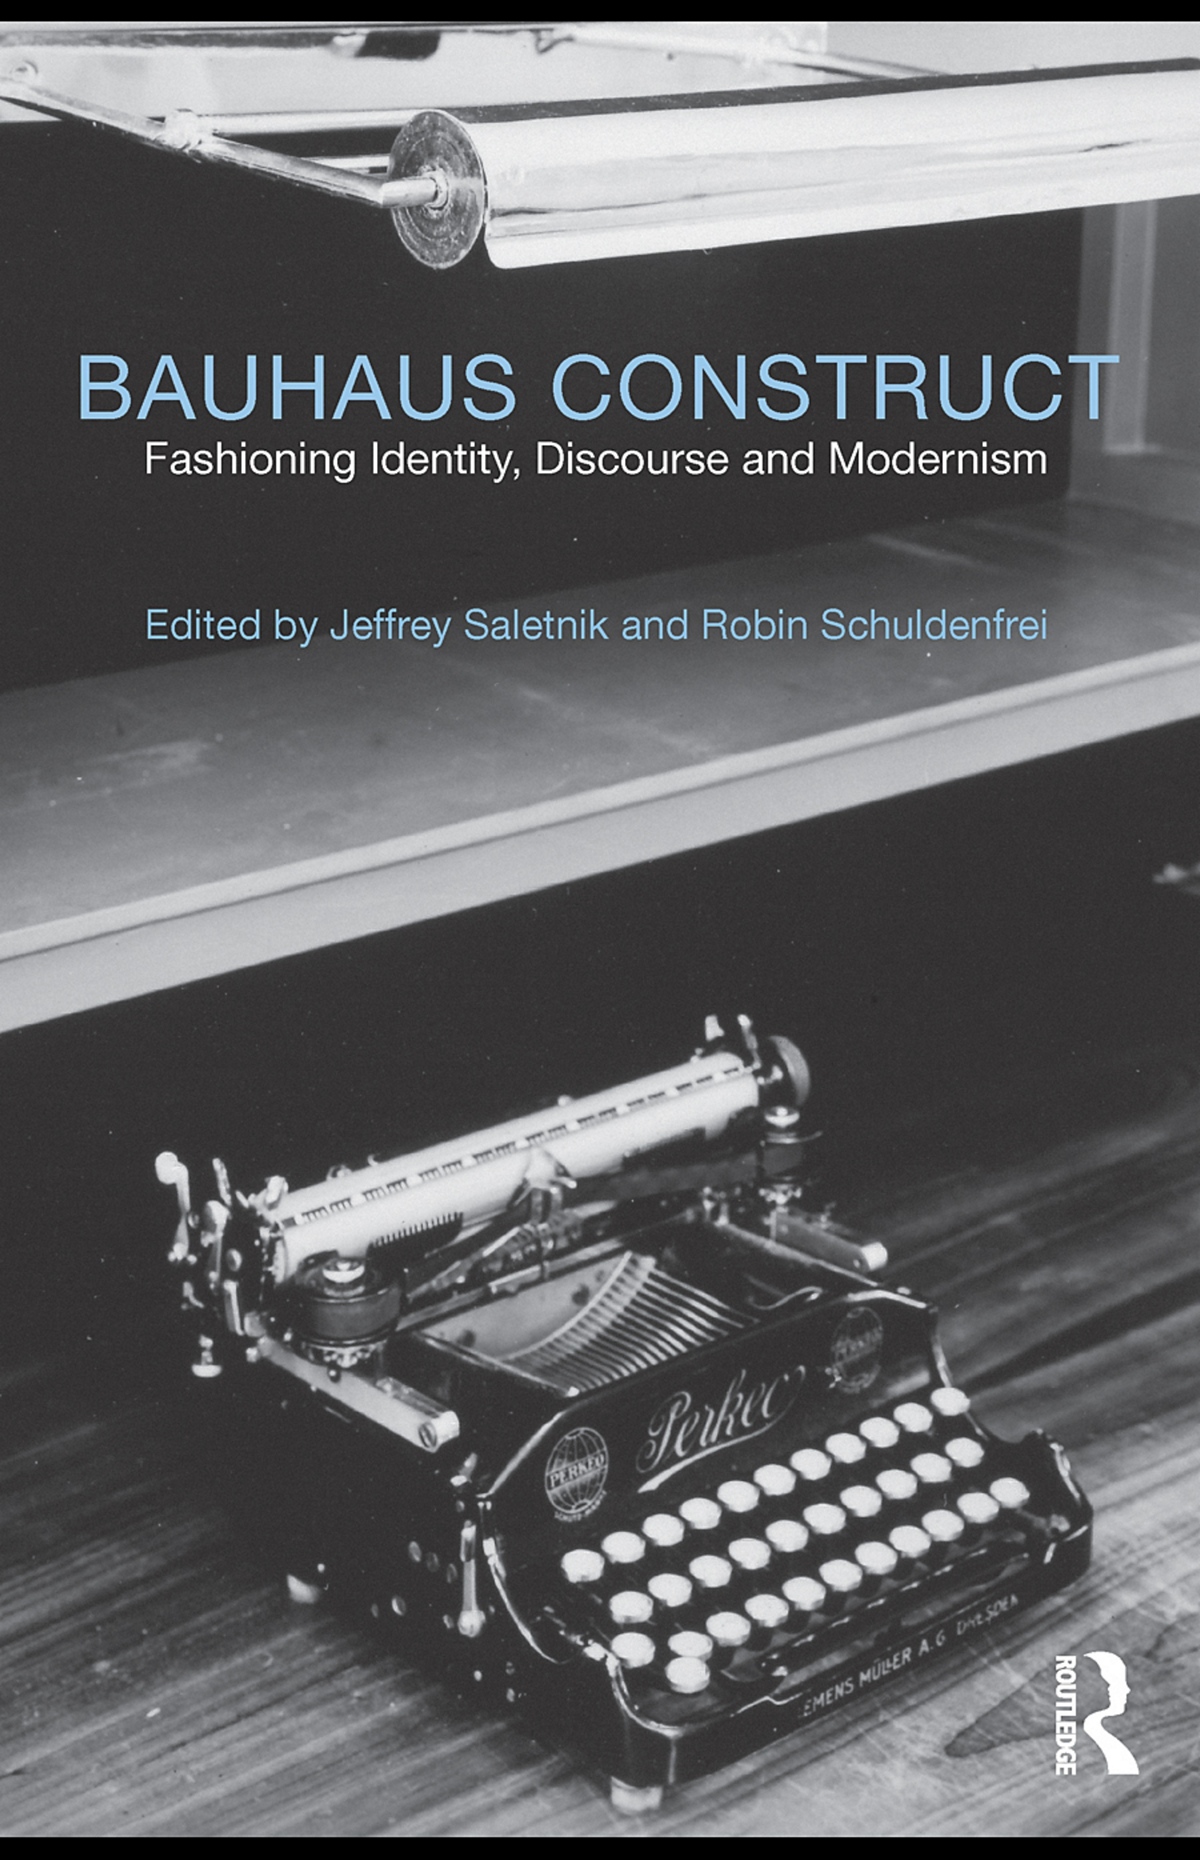 Bauhaus Construct : Fashioning Identity, Discourse and Modernism / Edited by Jeffrey Saletnik and Robin Schuldenfrei. — First published 2009 by Routledge. — London ; New York : Routledge, 2010